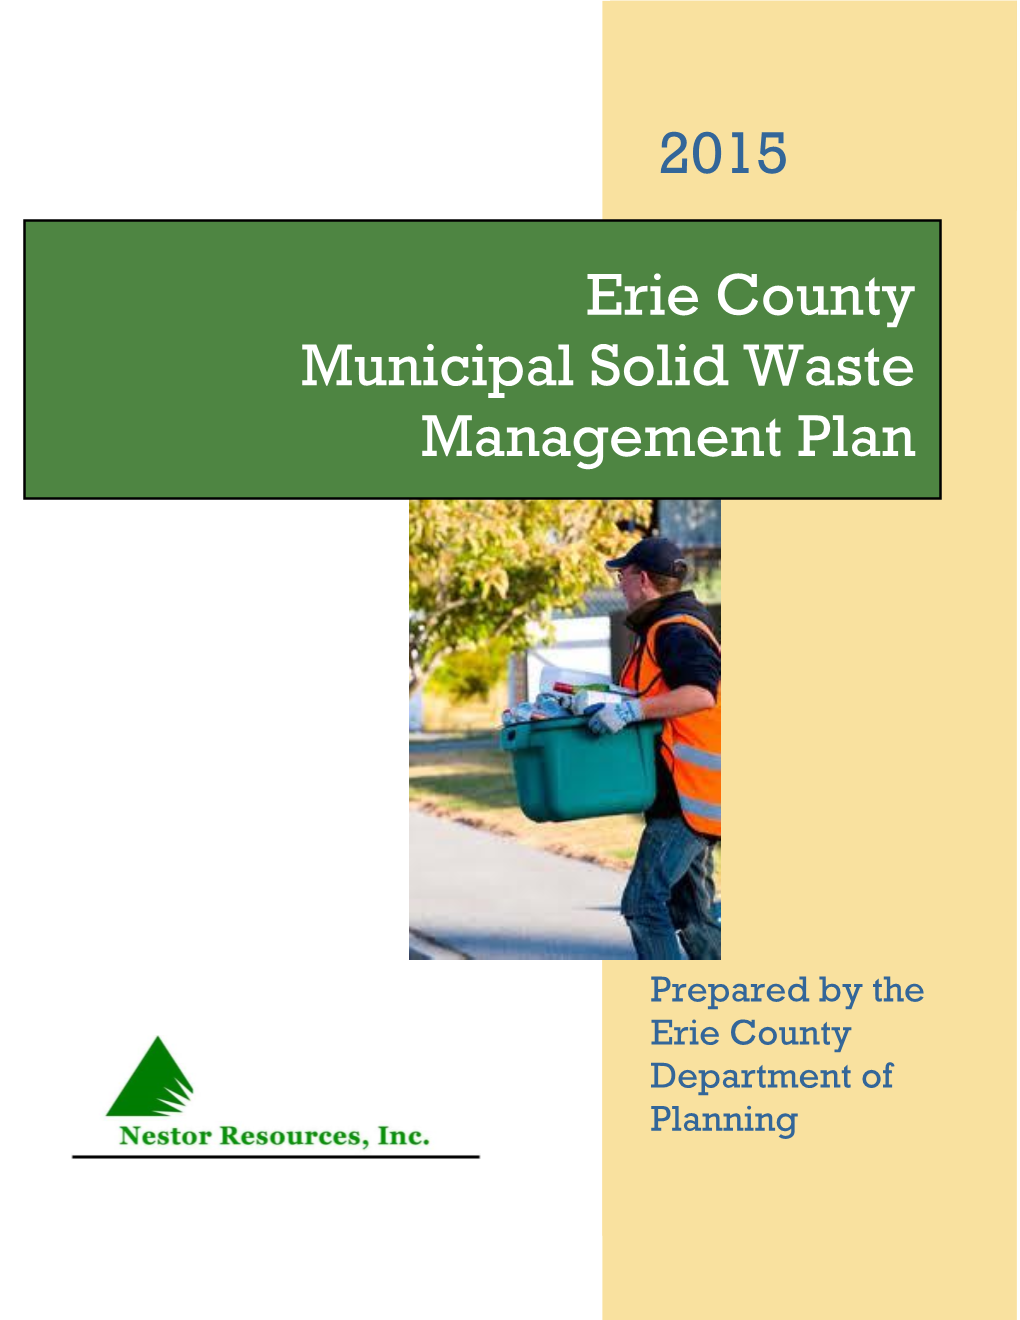 Erie County Municipal Solid Waste Management Plan